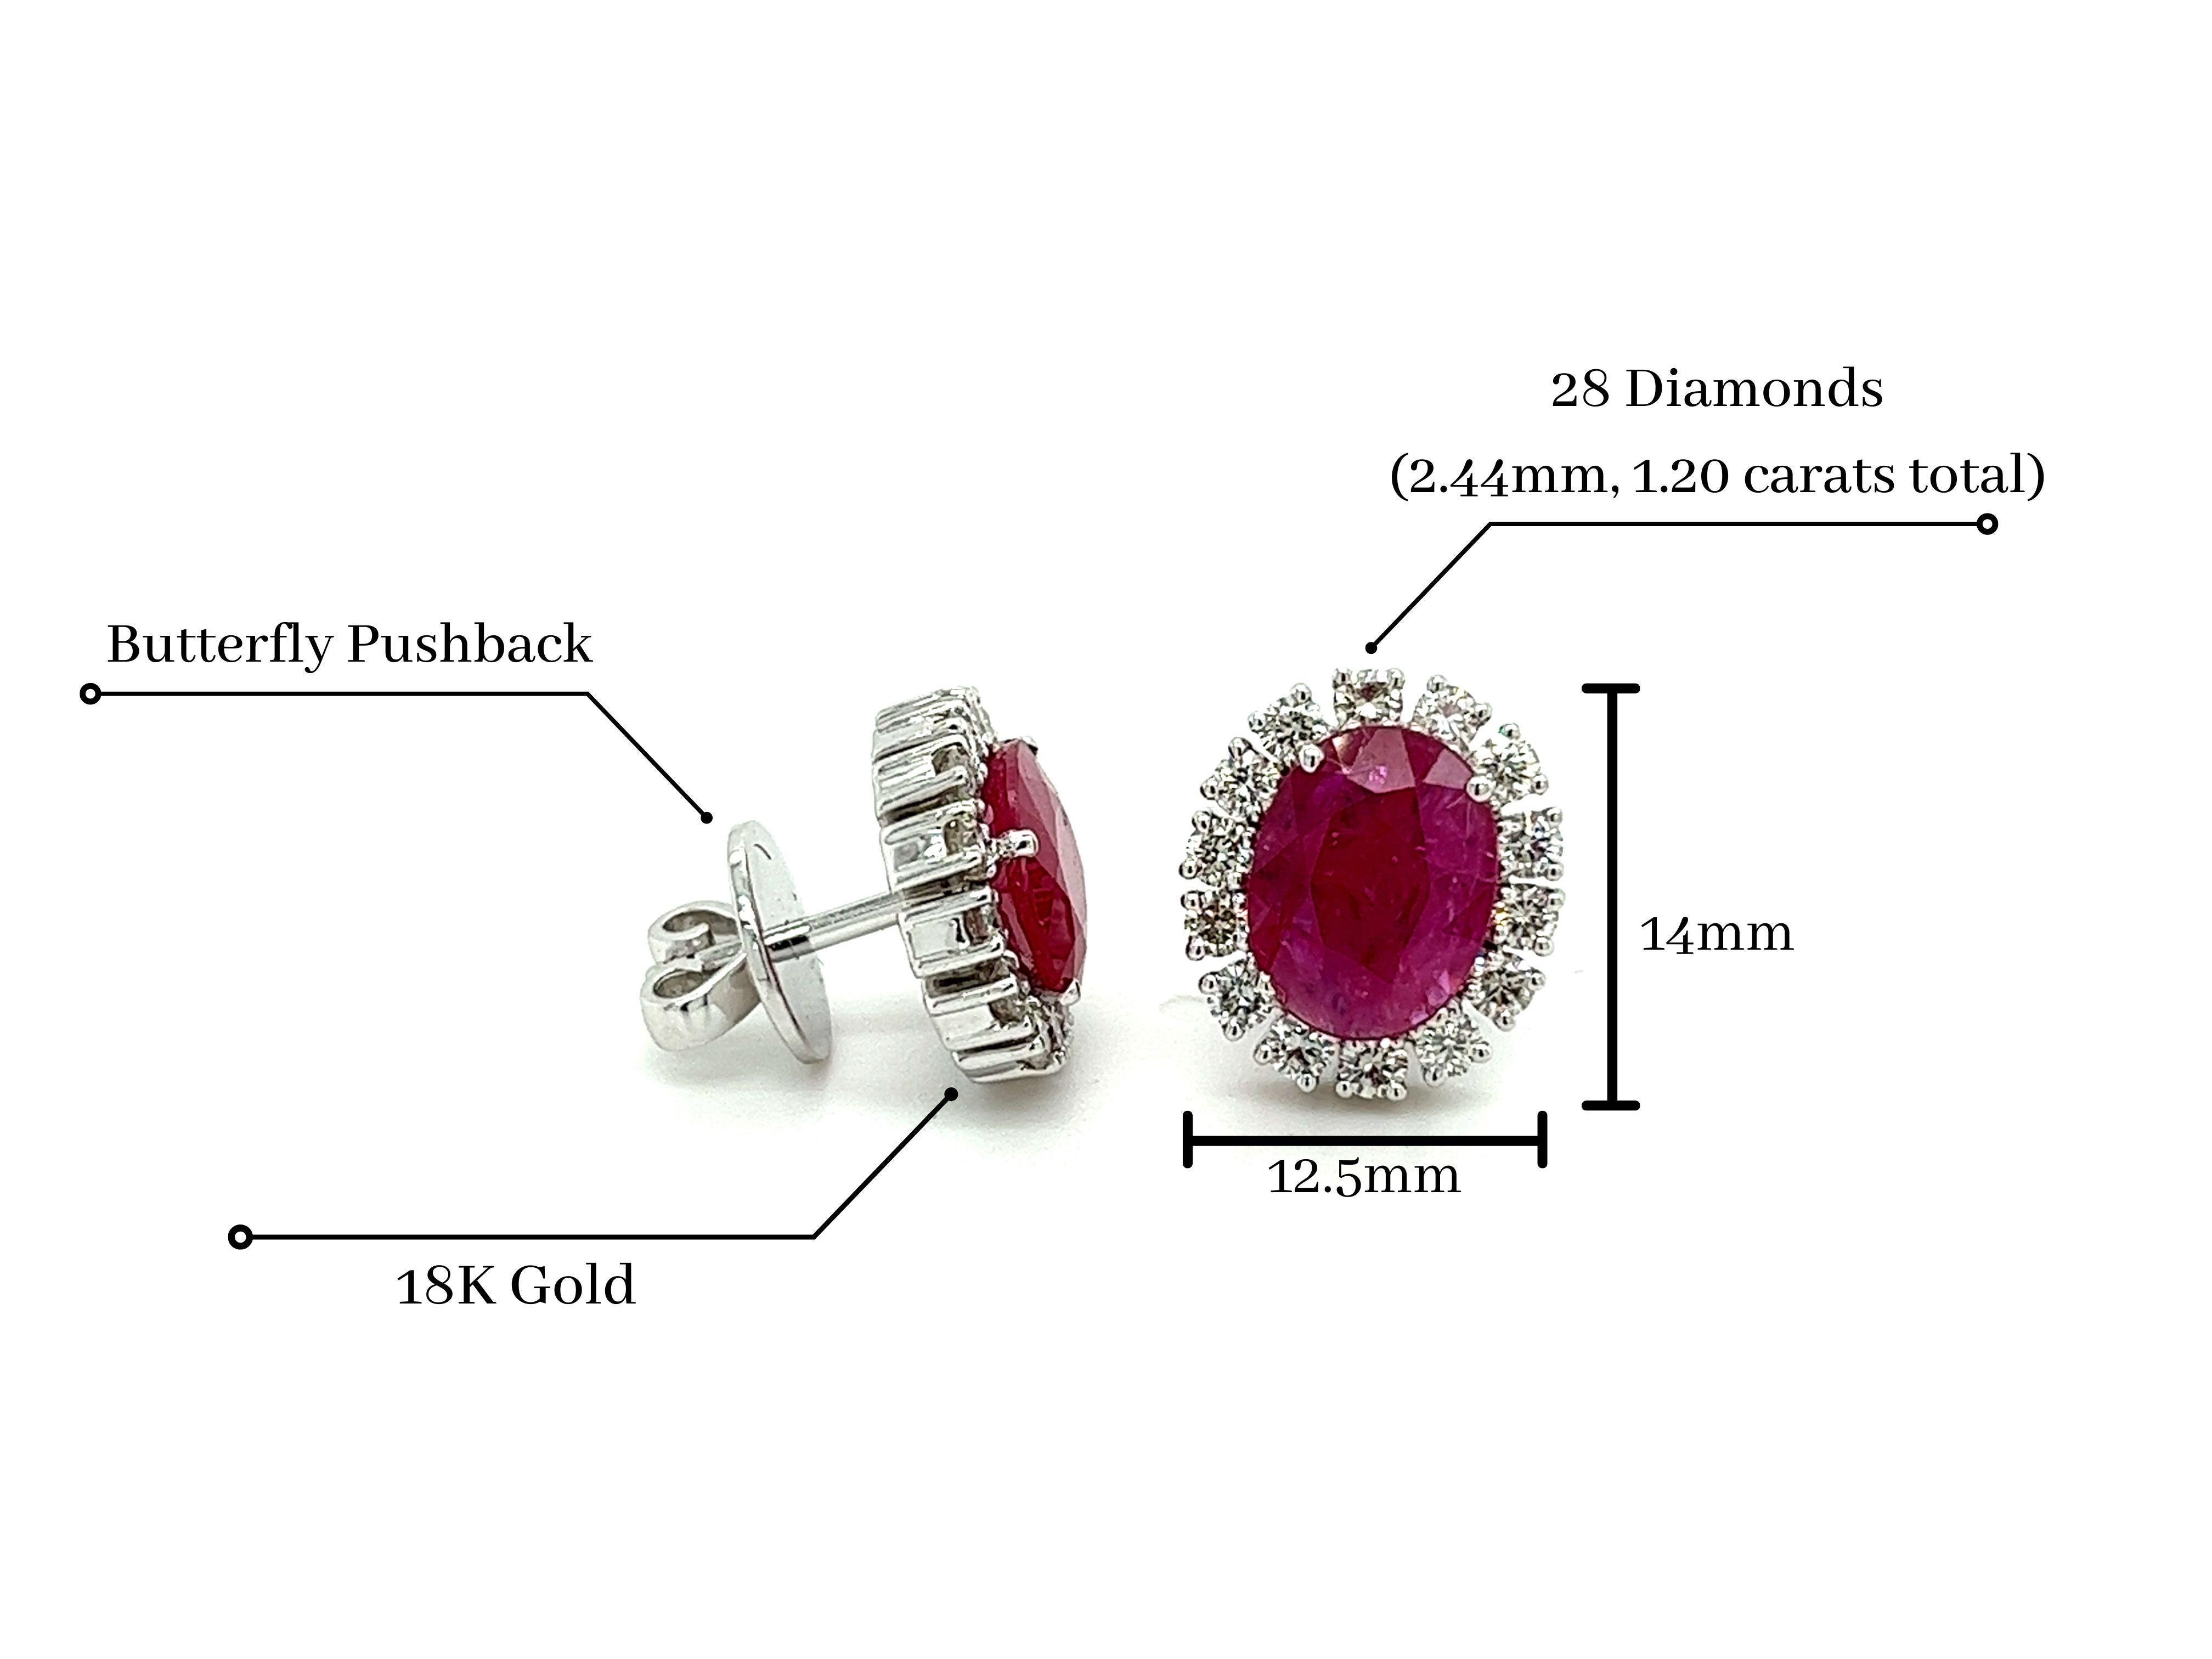 No heat, untreated oval cut pair of Rubies set in a round cut diamond halo. Mounted in 18-karat white gold with butterfly push-back posts. These Rubies bear excellent color and luster, an especially incredible feat considering they're not treated.